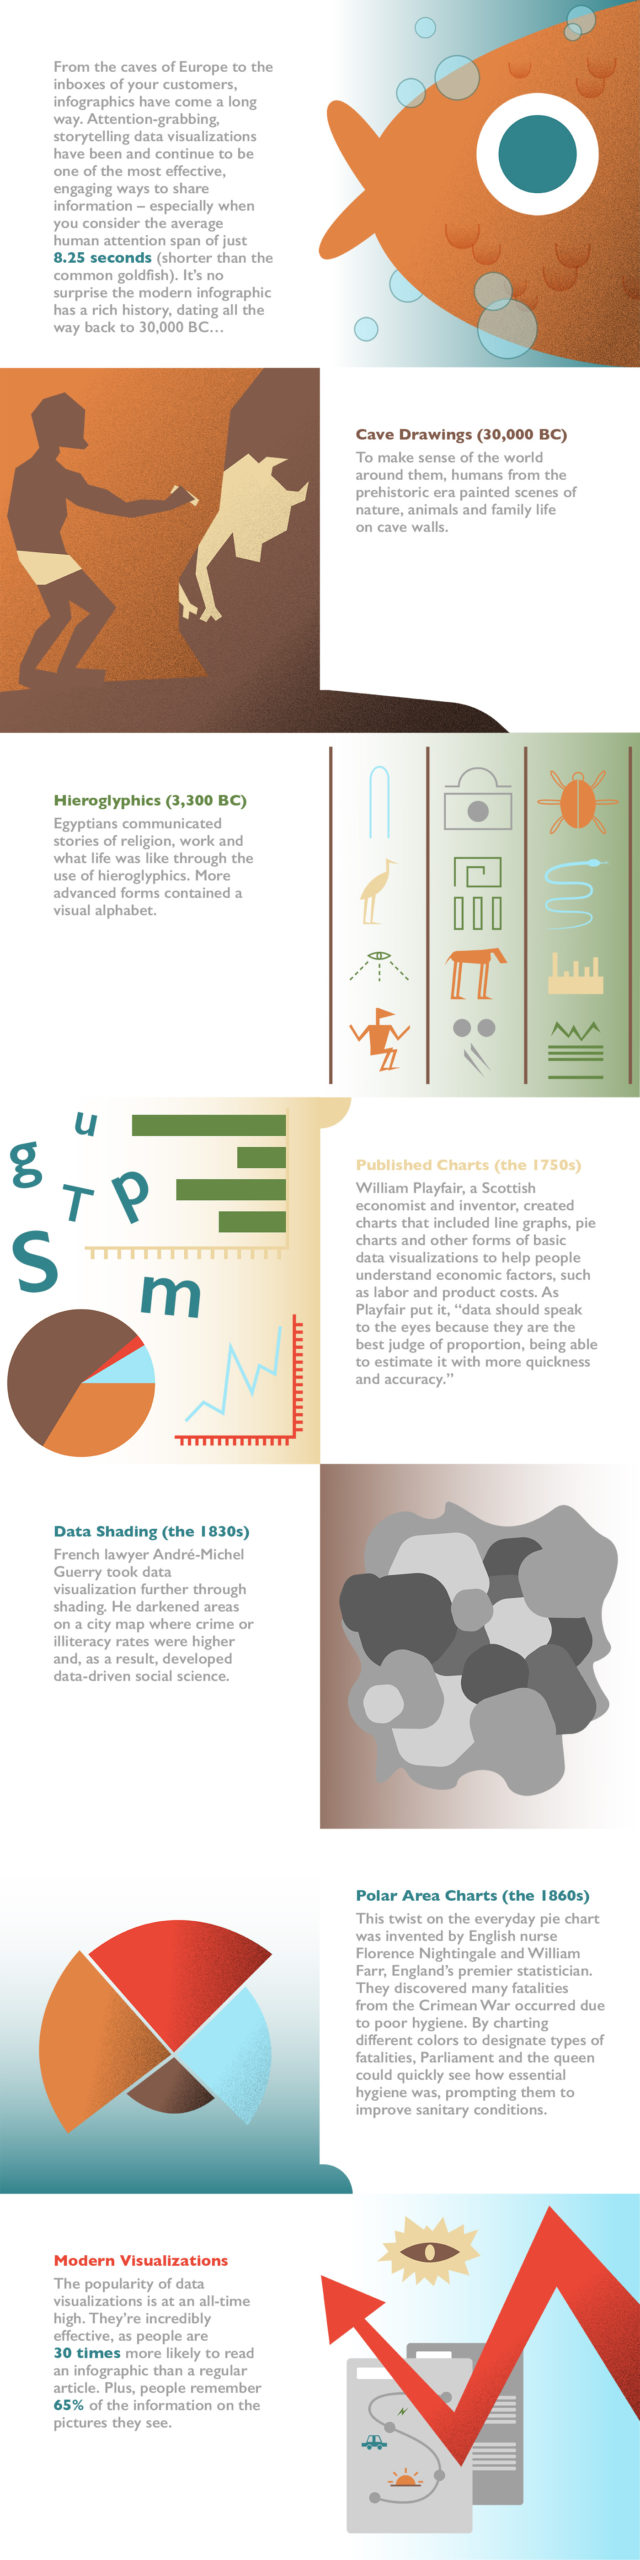 Infographic shows the history of visual communications